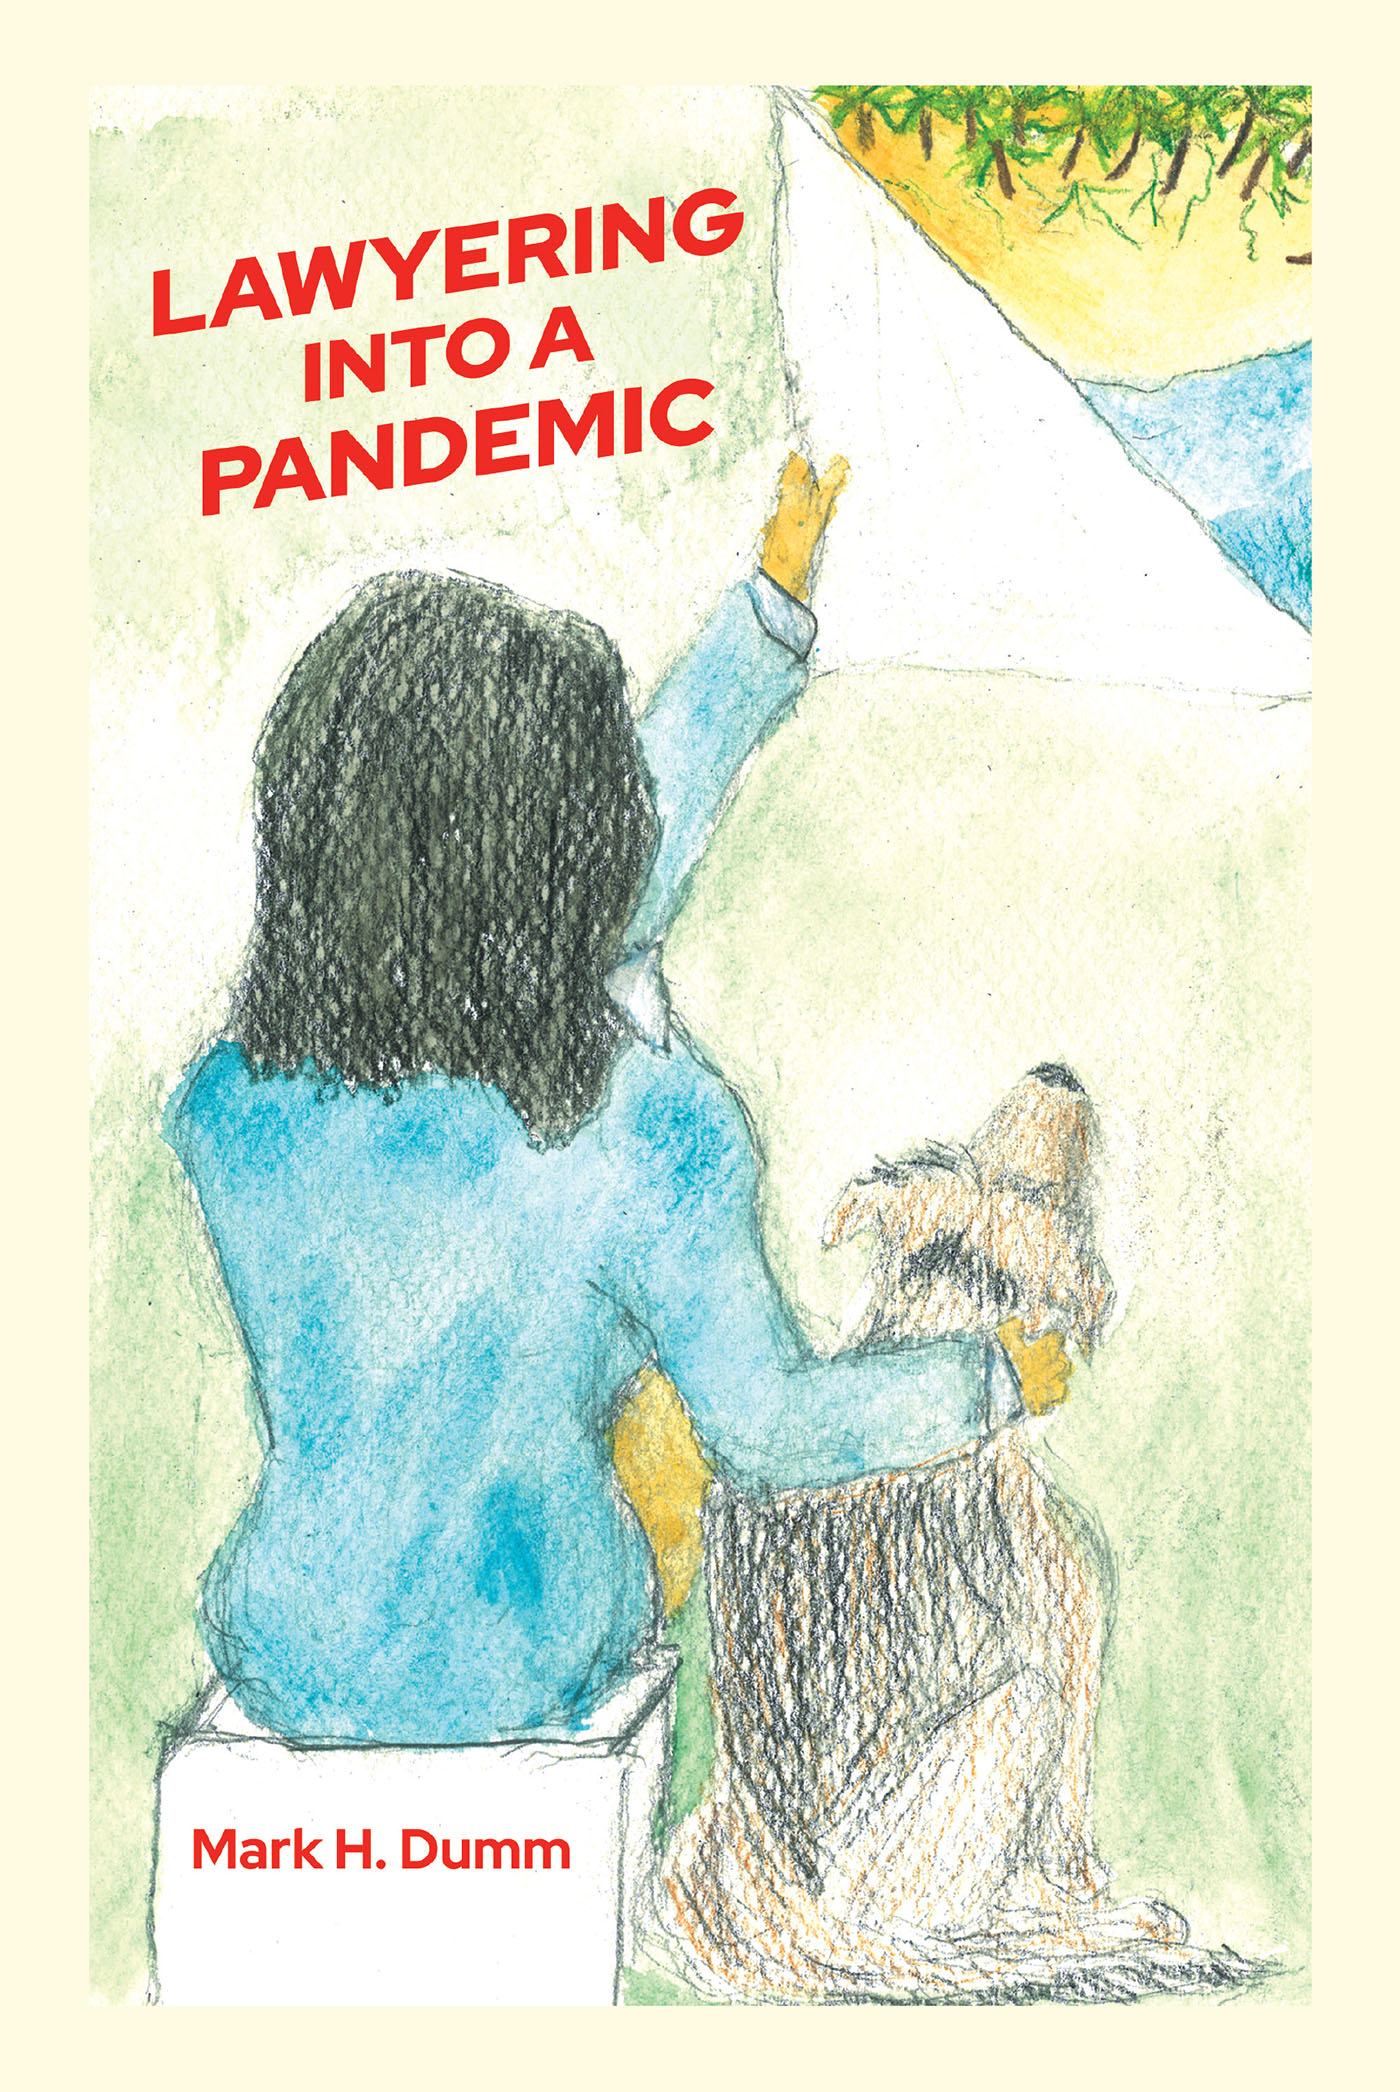 Author Mark H. Dumm’s New Book "Lawyering Into A Pandemic" is the Story of Two Legal Professionals Finding Romance While Trying to do Their Jobs During a Global Pandemic